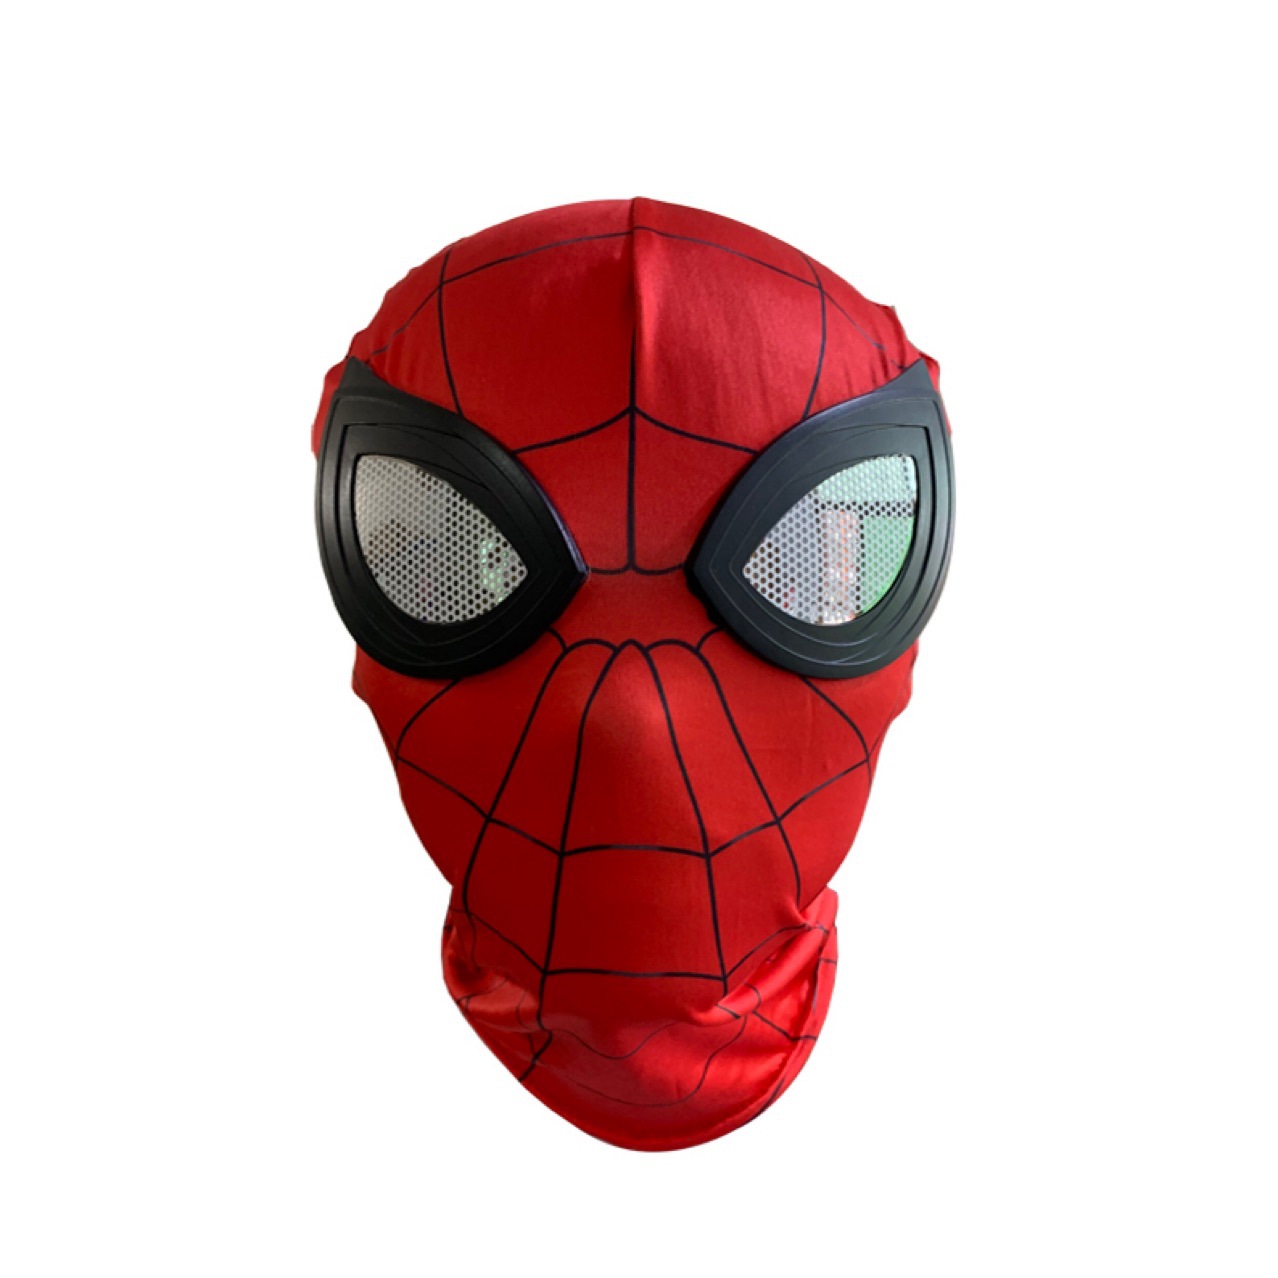 Douyin Normal Heart Same Headgear Amazing Spider-Man Headgear Funny Cosplay Mask for Adults and Children